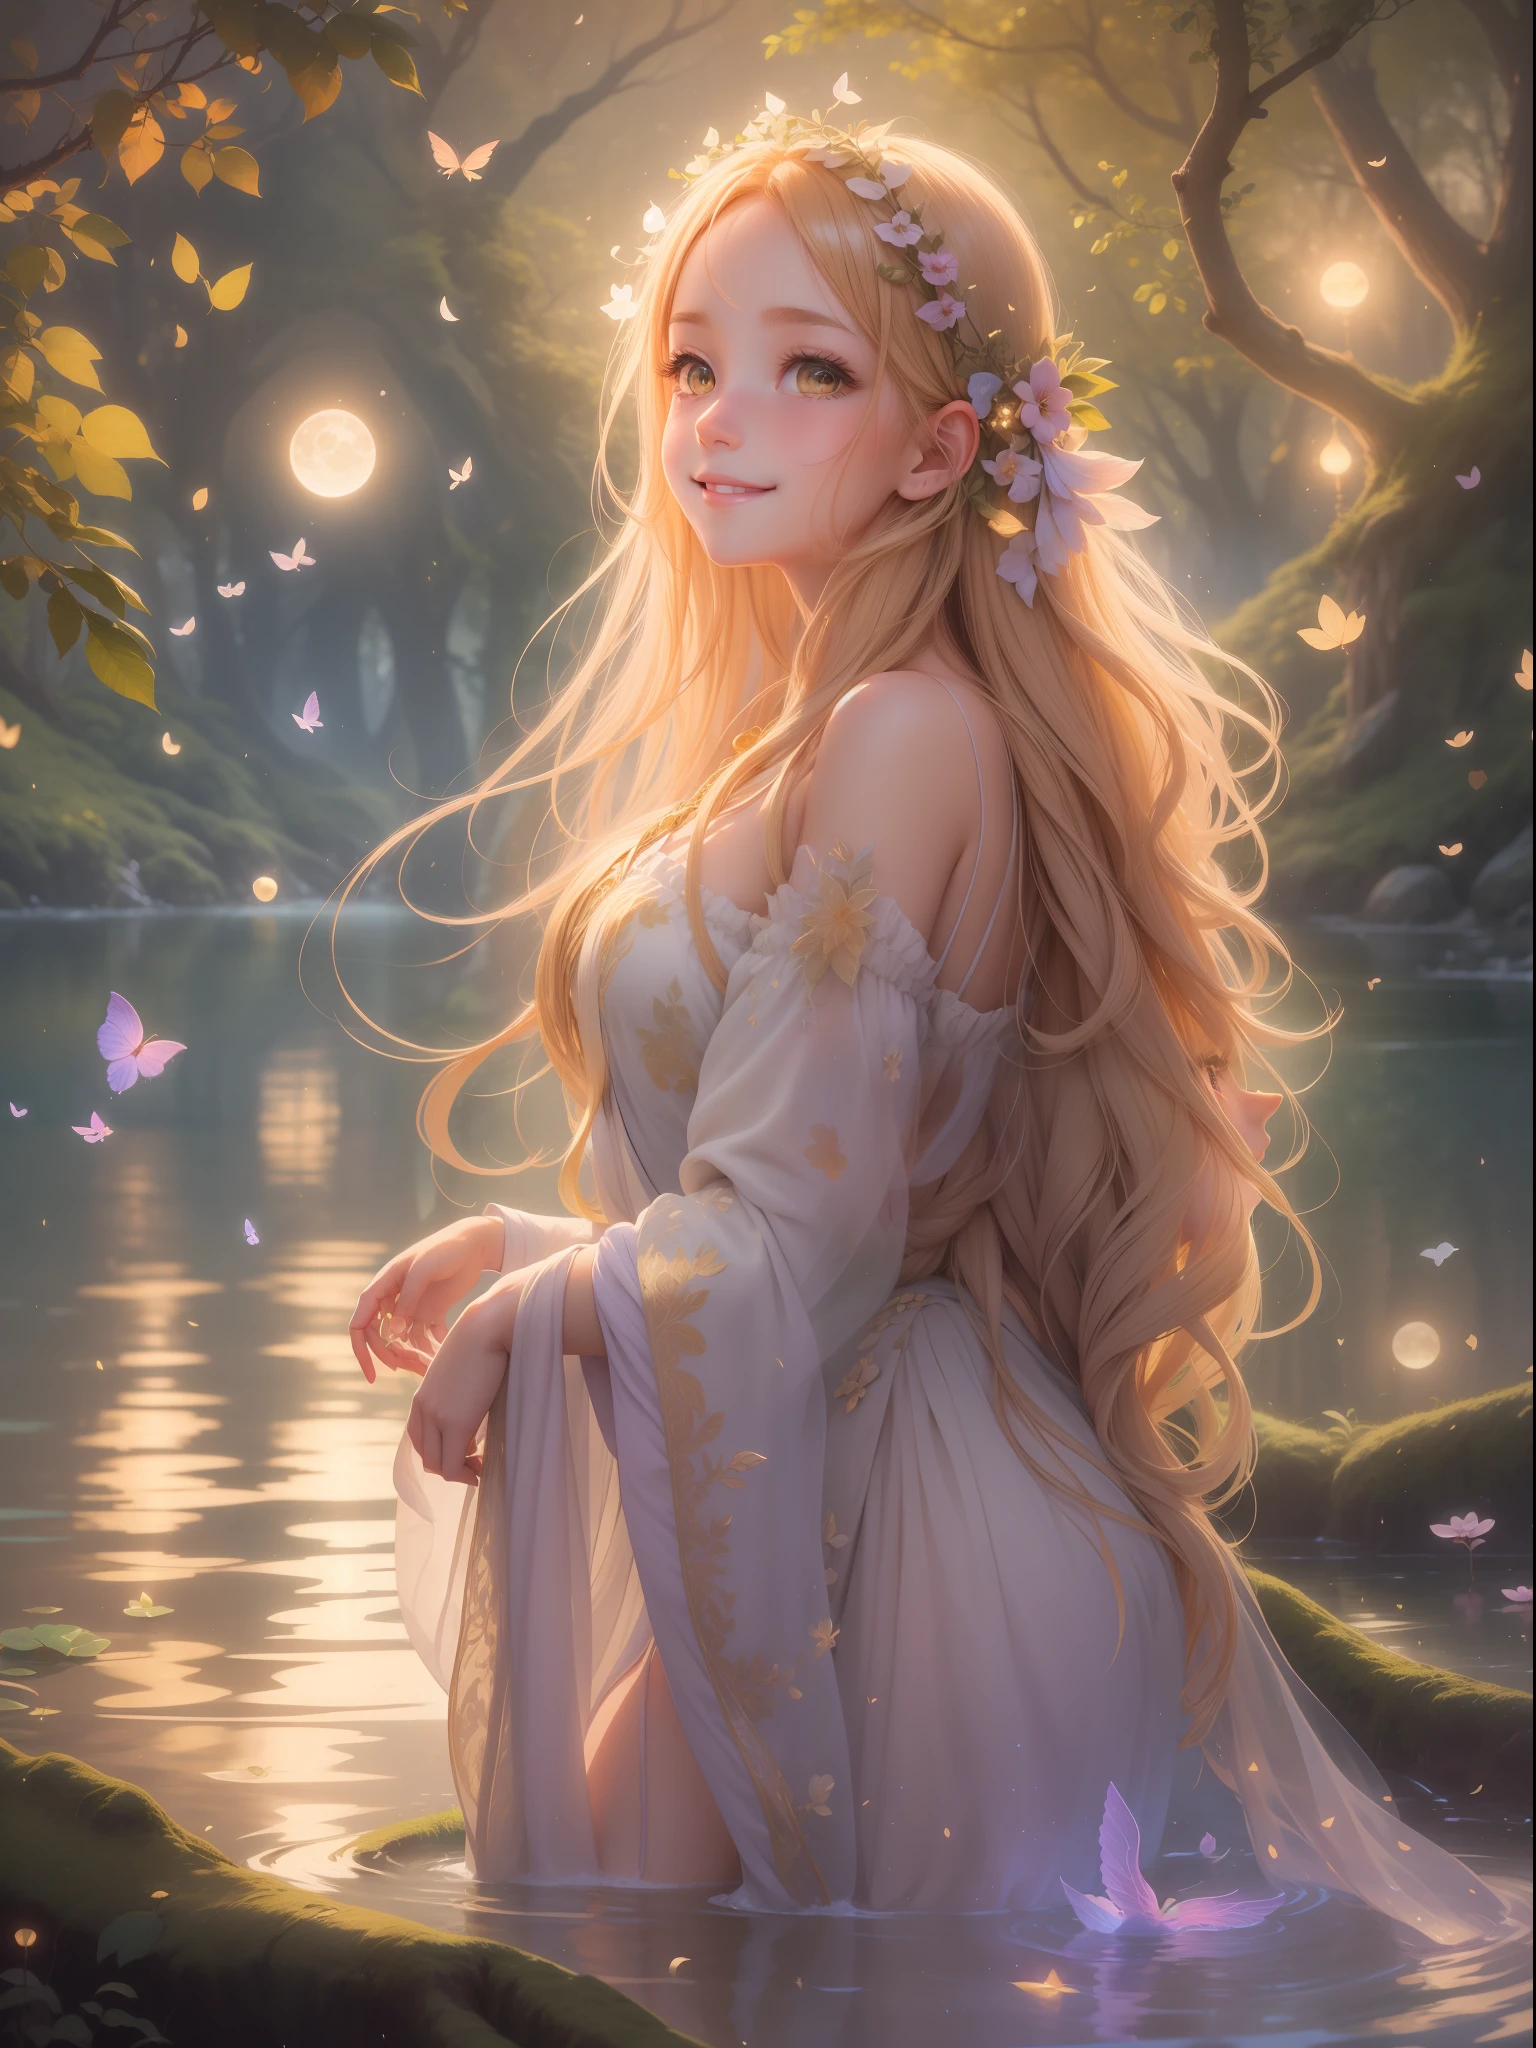 --Nymph --graceful --fluttering --bright eyes --radiant skin --golden hair --charming smile --bathing in soft moonlight,
--Scenery --magical --enchanted forest --soft moonlight --lake,
--Aura --serene --ancestral mystery --ethereal beauty,